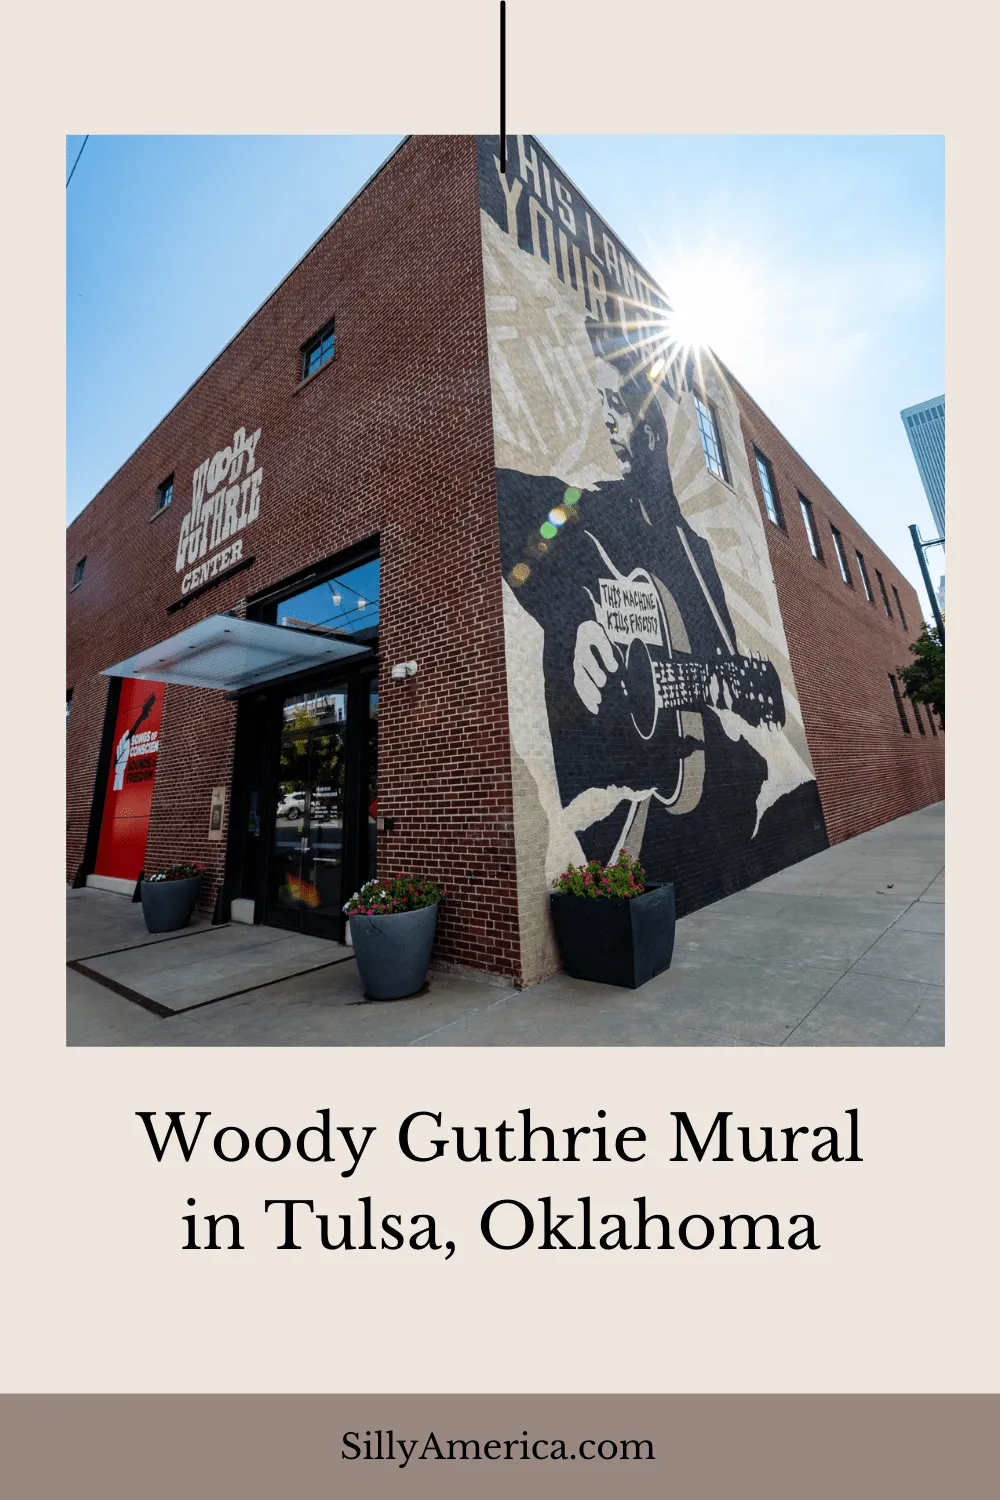 The Woody Guthrie Mural, painted in his honor, can be found on the west side of the Tulsa Paper Company Building, which is now home to the Woody Guthrie Center. The Center is a museum dedicated to the artist and celebrates his life, art, and accomplishments with music and memorabilia. #TULSA #TulsaOklahoma #RoadTrips #RoadTripStop #Route66 #Route66RoadTrip #OklahomaRoute66 #Oklahoma #OklahomaRoadTrip #OklahomaRoadsideAttractions #RoadsideAttractions #RoadsideAttraction #RoadsideAmerica #RoadTrip